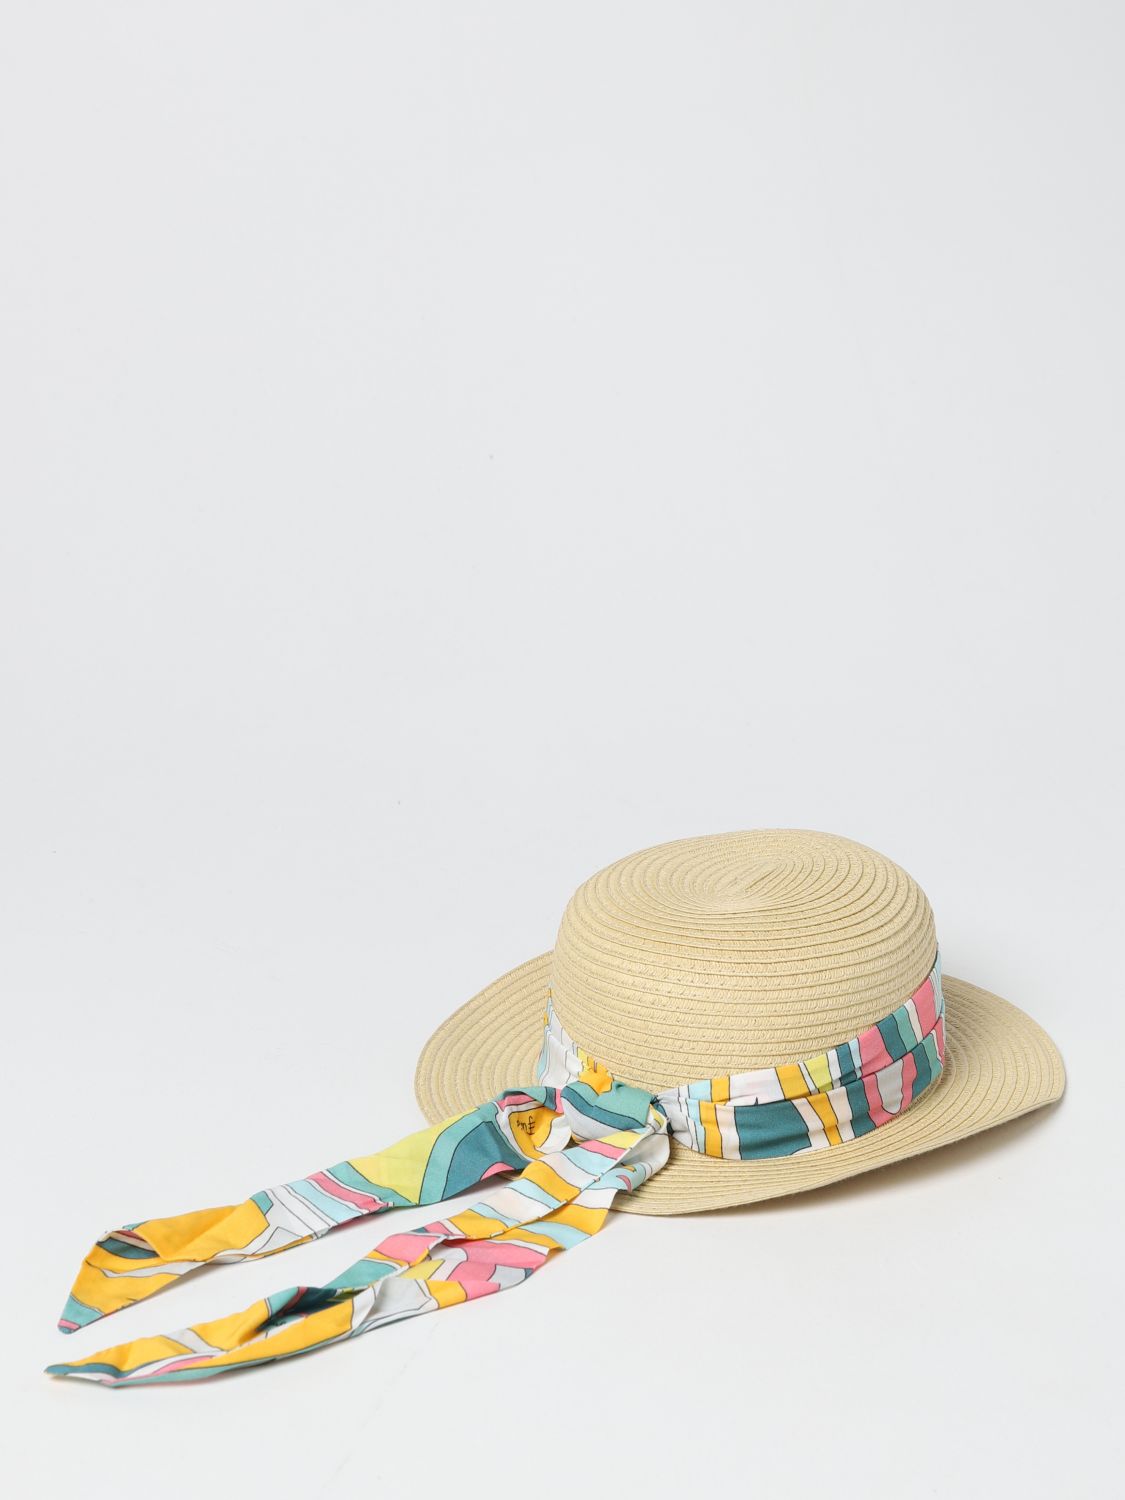 Girls' hats Emilio Pucci: Emilio Pucci hat with printed ribbon green 2